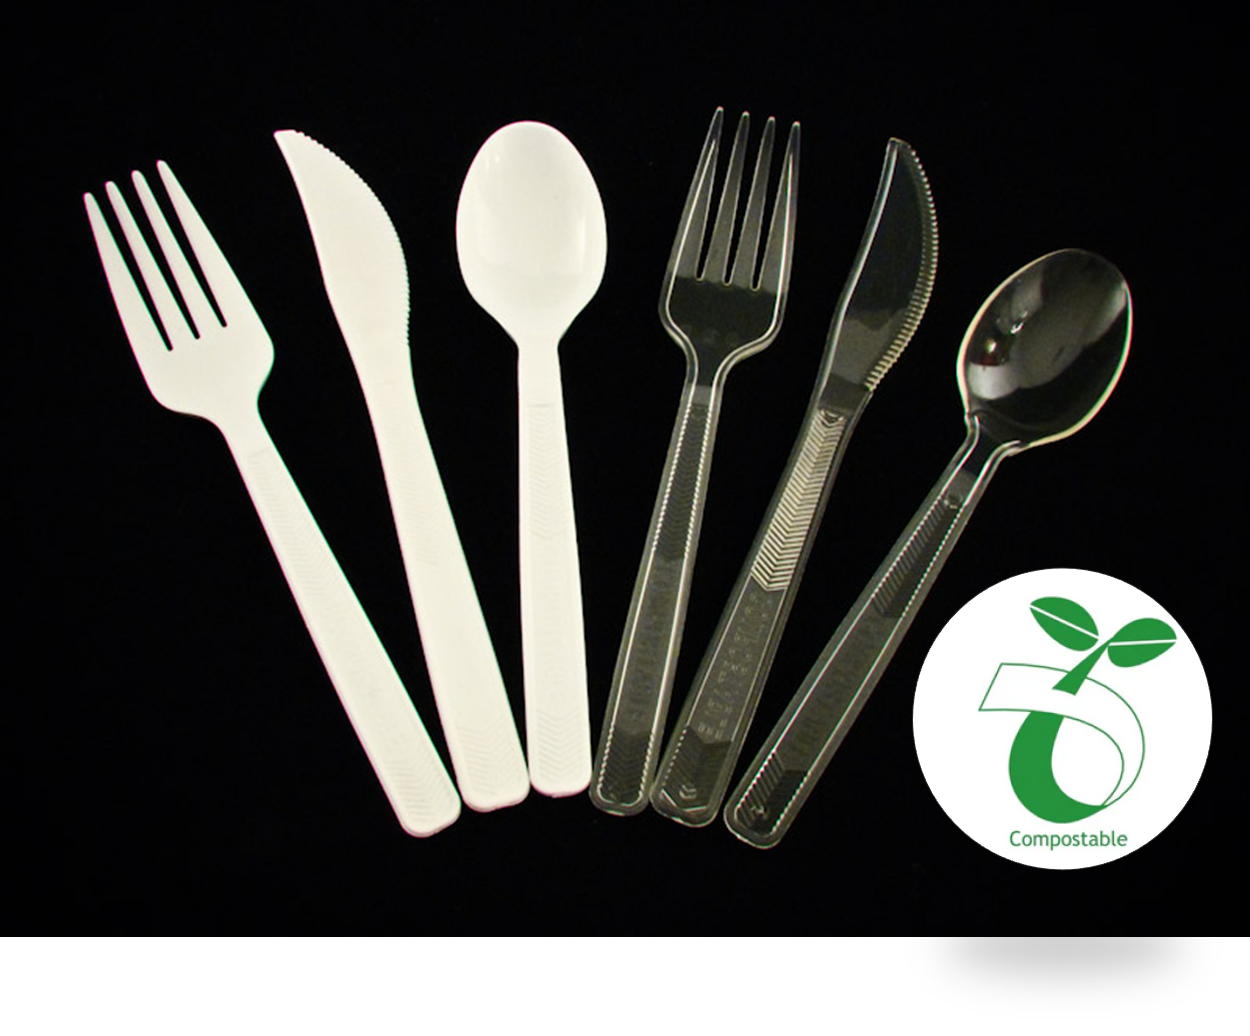 Designed for cold applications, BioSelect® medium-weight cutlery knives are are made with Ingeo™ corn resins that are 100% biodegradable, 100% compostable and available in white or clear